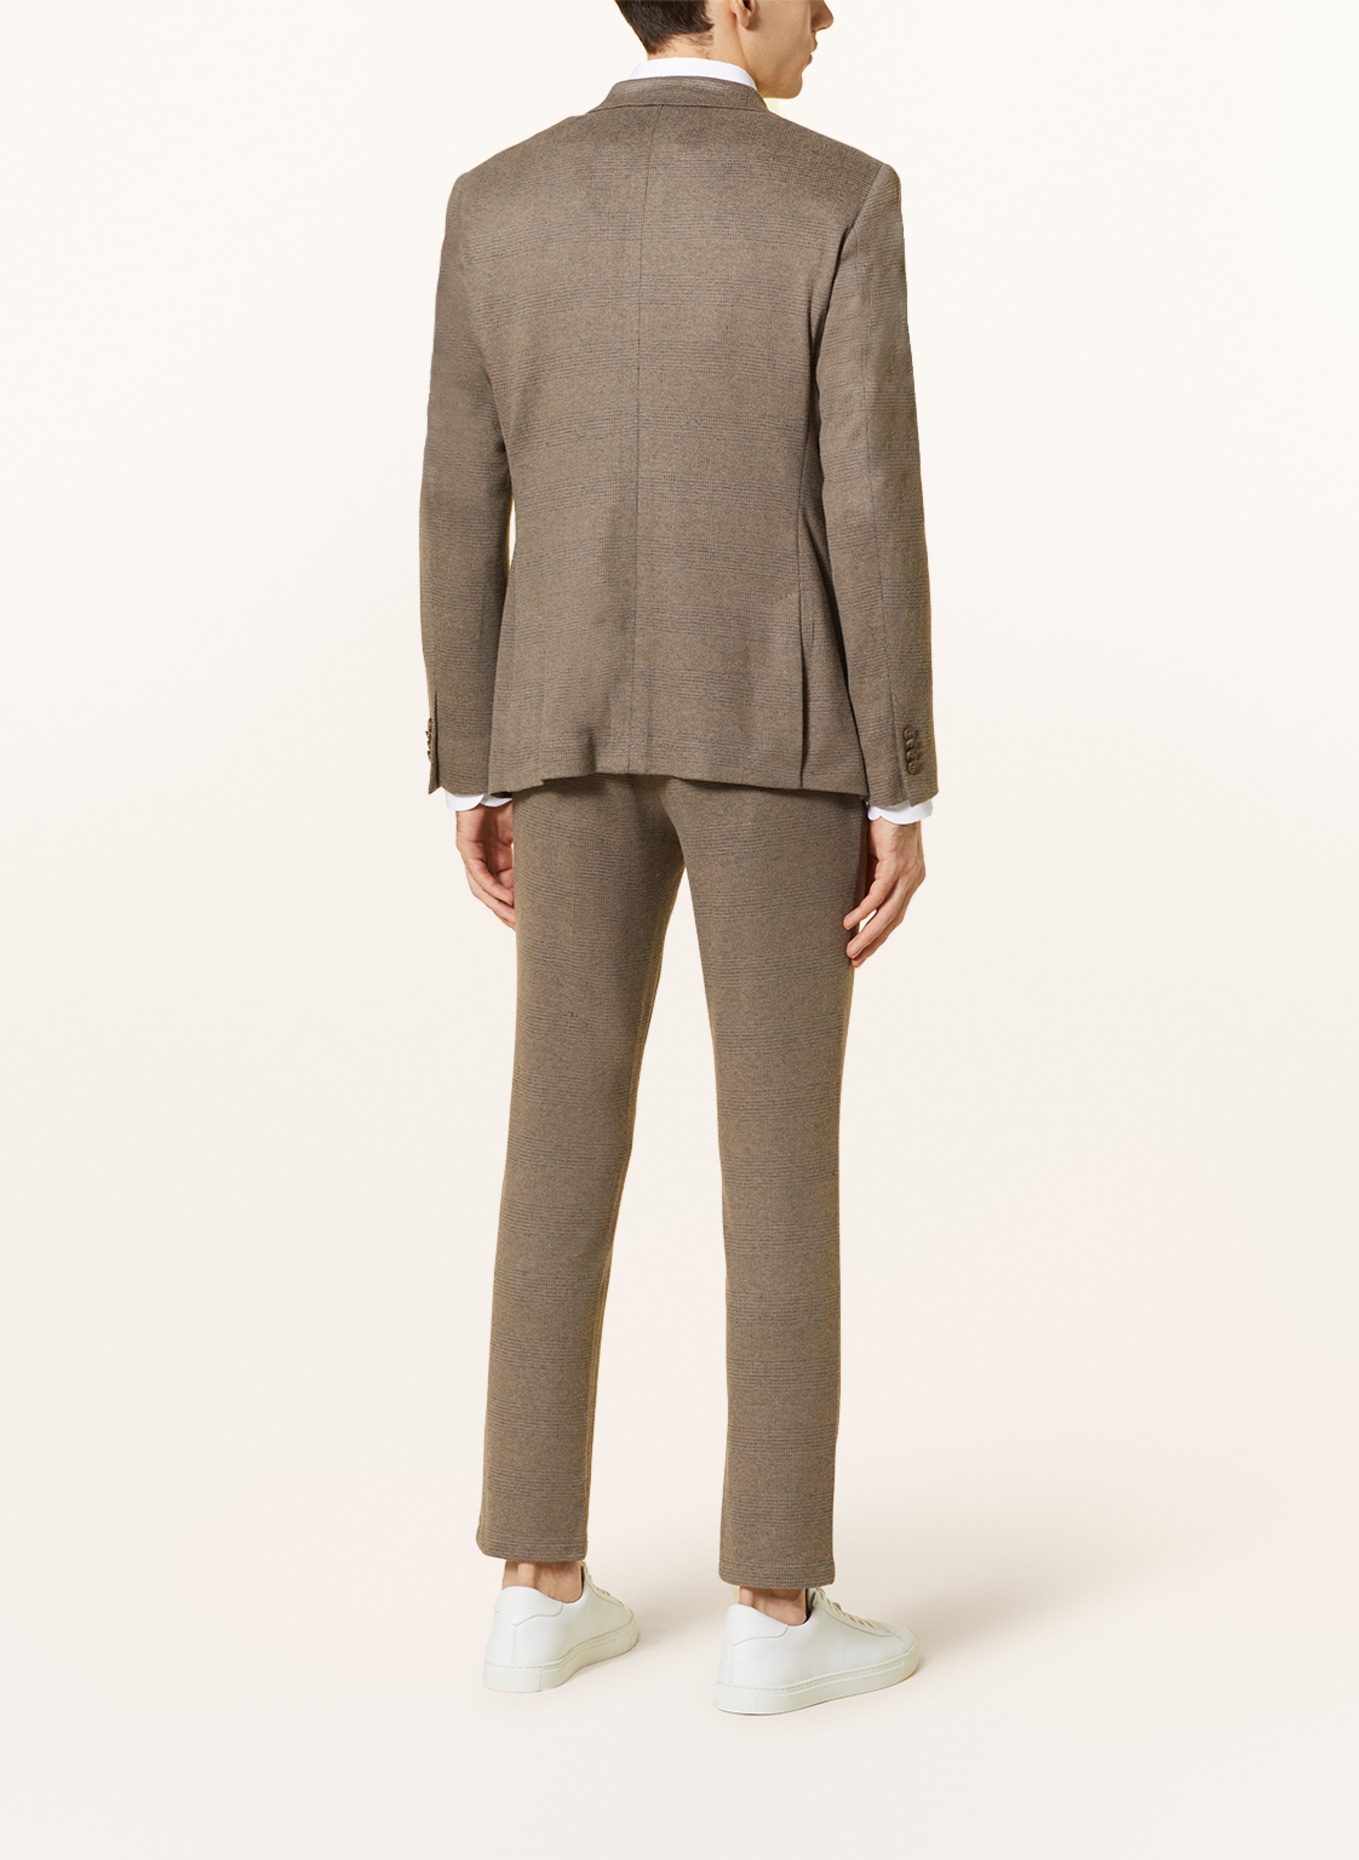 PAUL Suit jacket slim fit in jersey, Color: 810 TAUPE (Image 3)